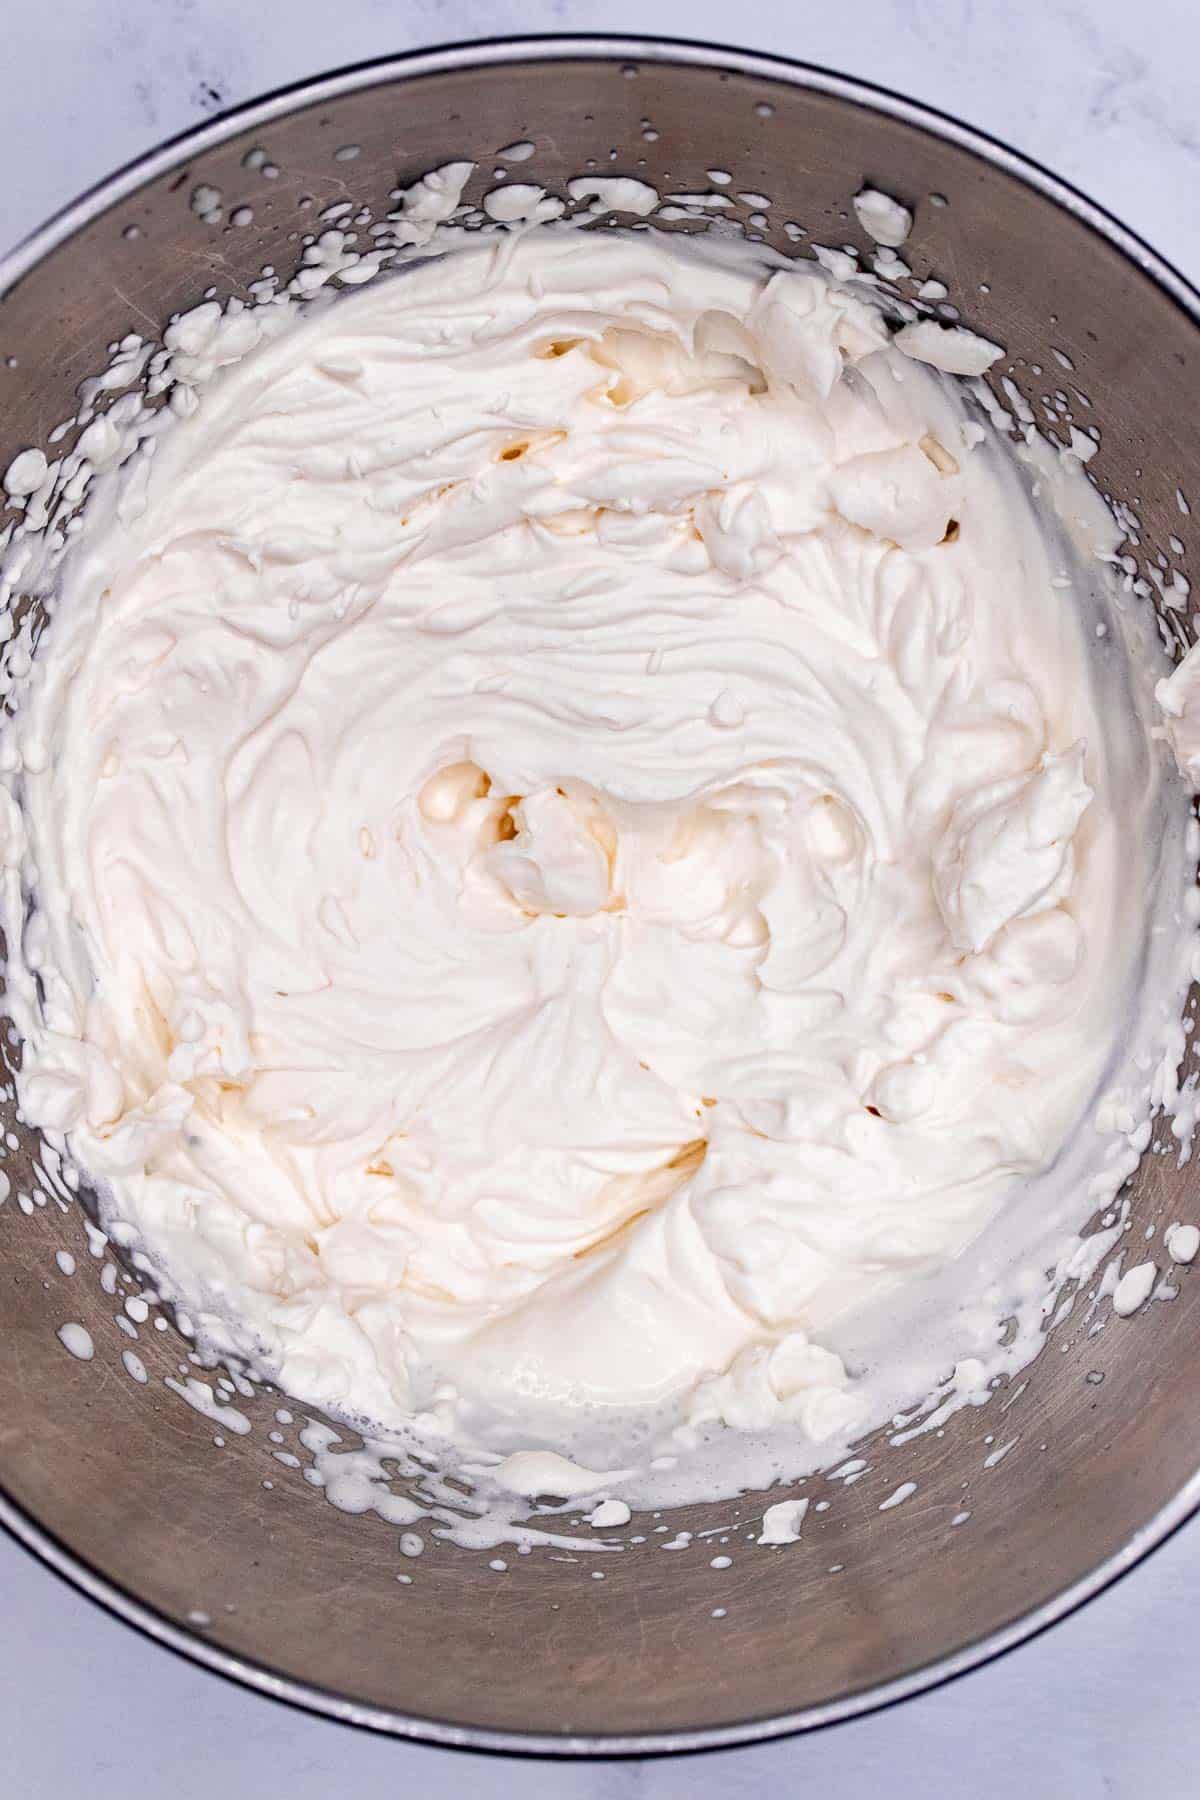 Homemade whipped cream with raspberry liqueur whipped to stiff peaks.